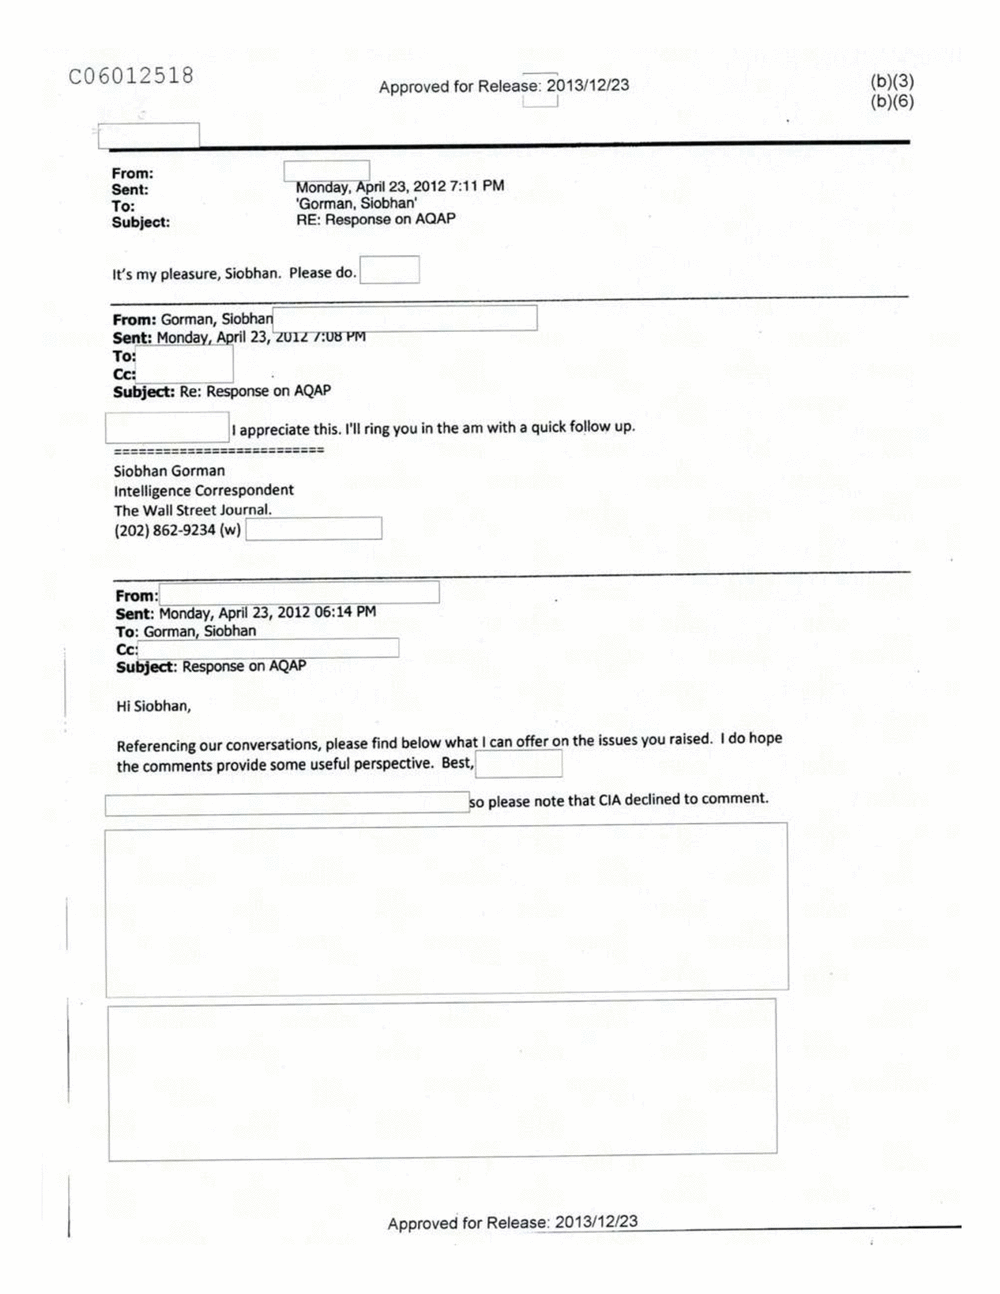 Page 37 from Email Correspondence Between Reporters and CIA Flacks